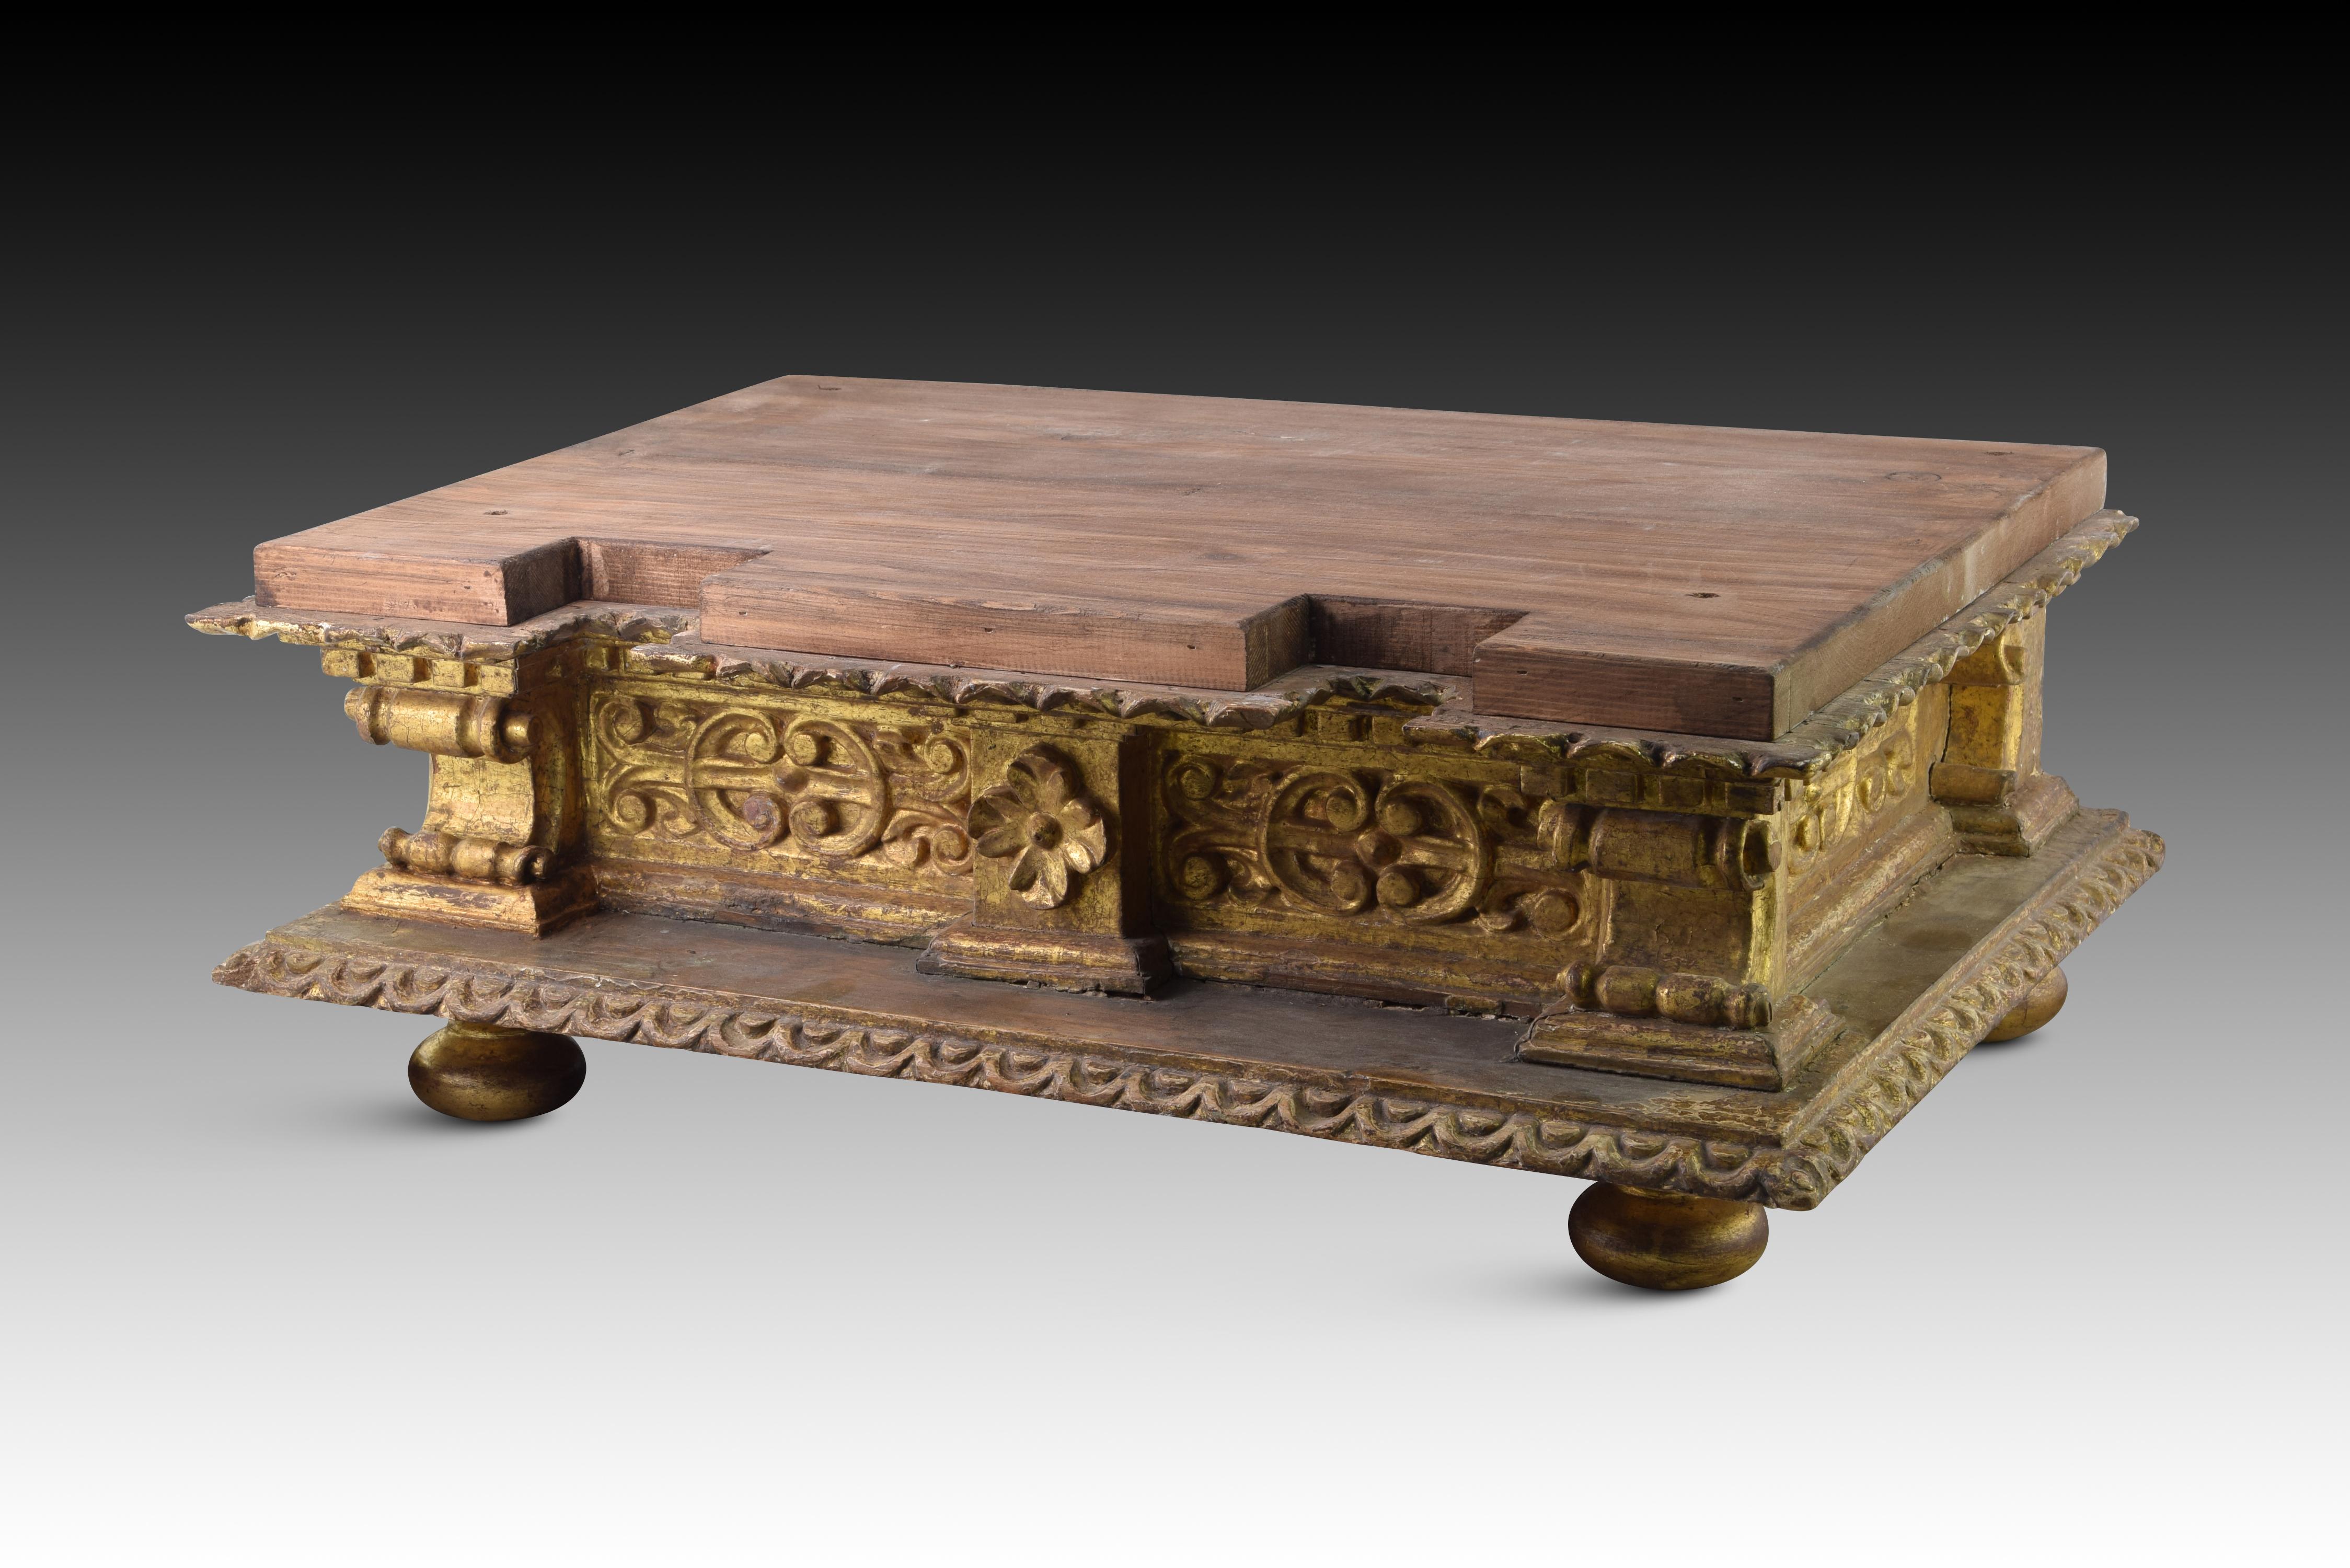 Base. Carved and gilded wood. Spanish school, 17th century. 
Base for sculpture made of carved and gilded wood with a rectangular and flat shape, slightly raised on circular legs and decorated on the front and sides with carved plant and